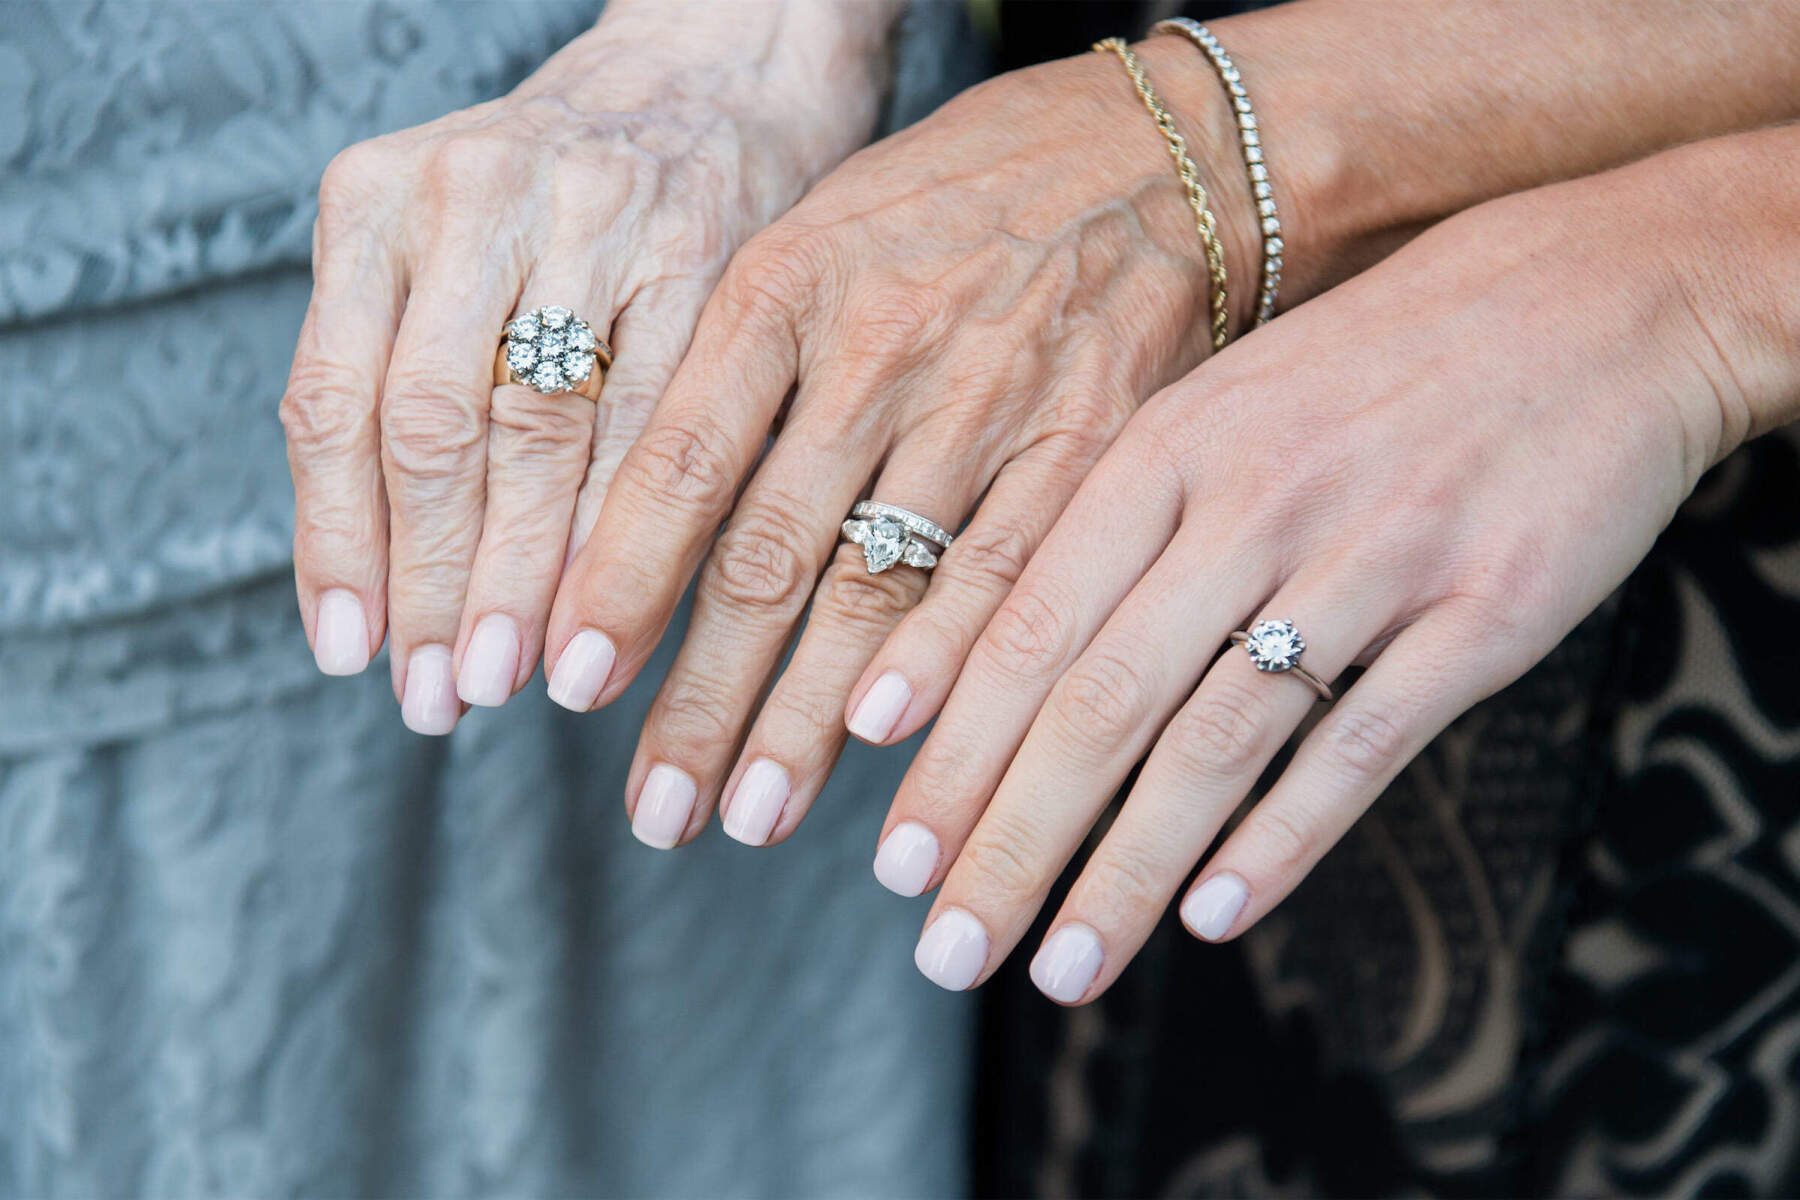 Wedding Ring Design: Three generations of hands with engagement rings on their ring fingers.